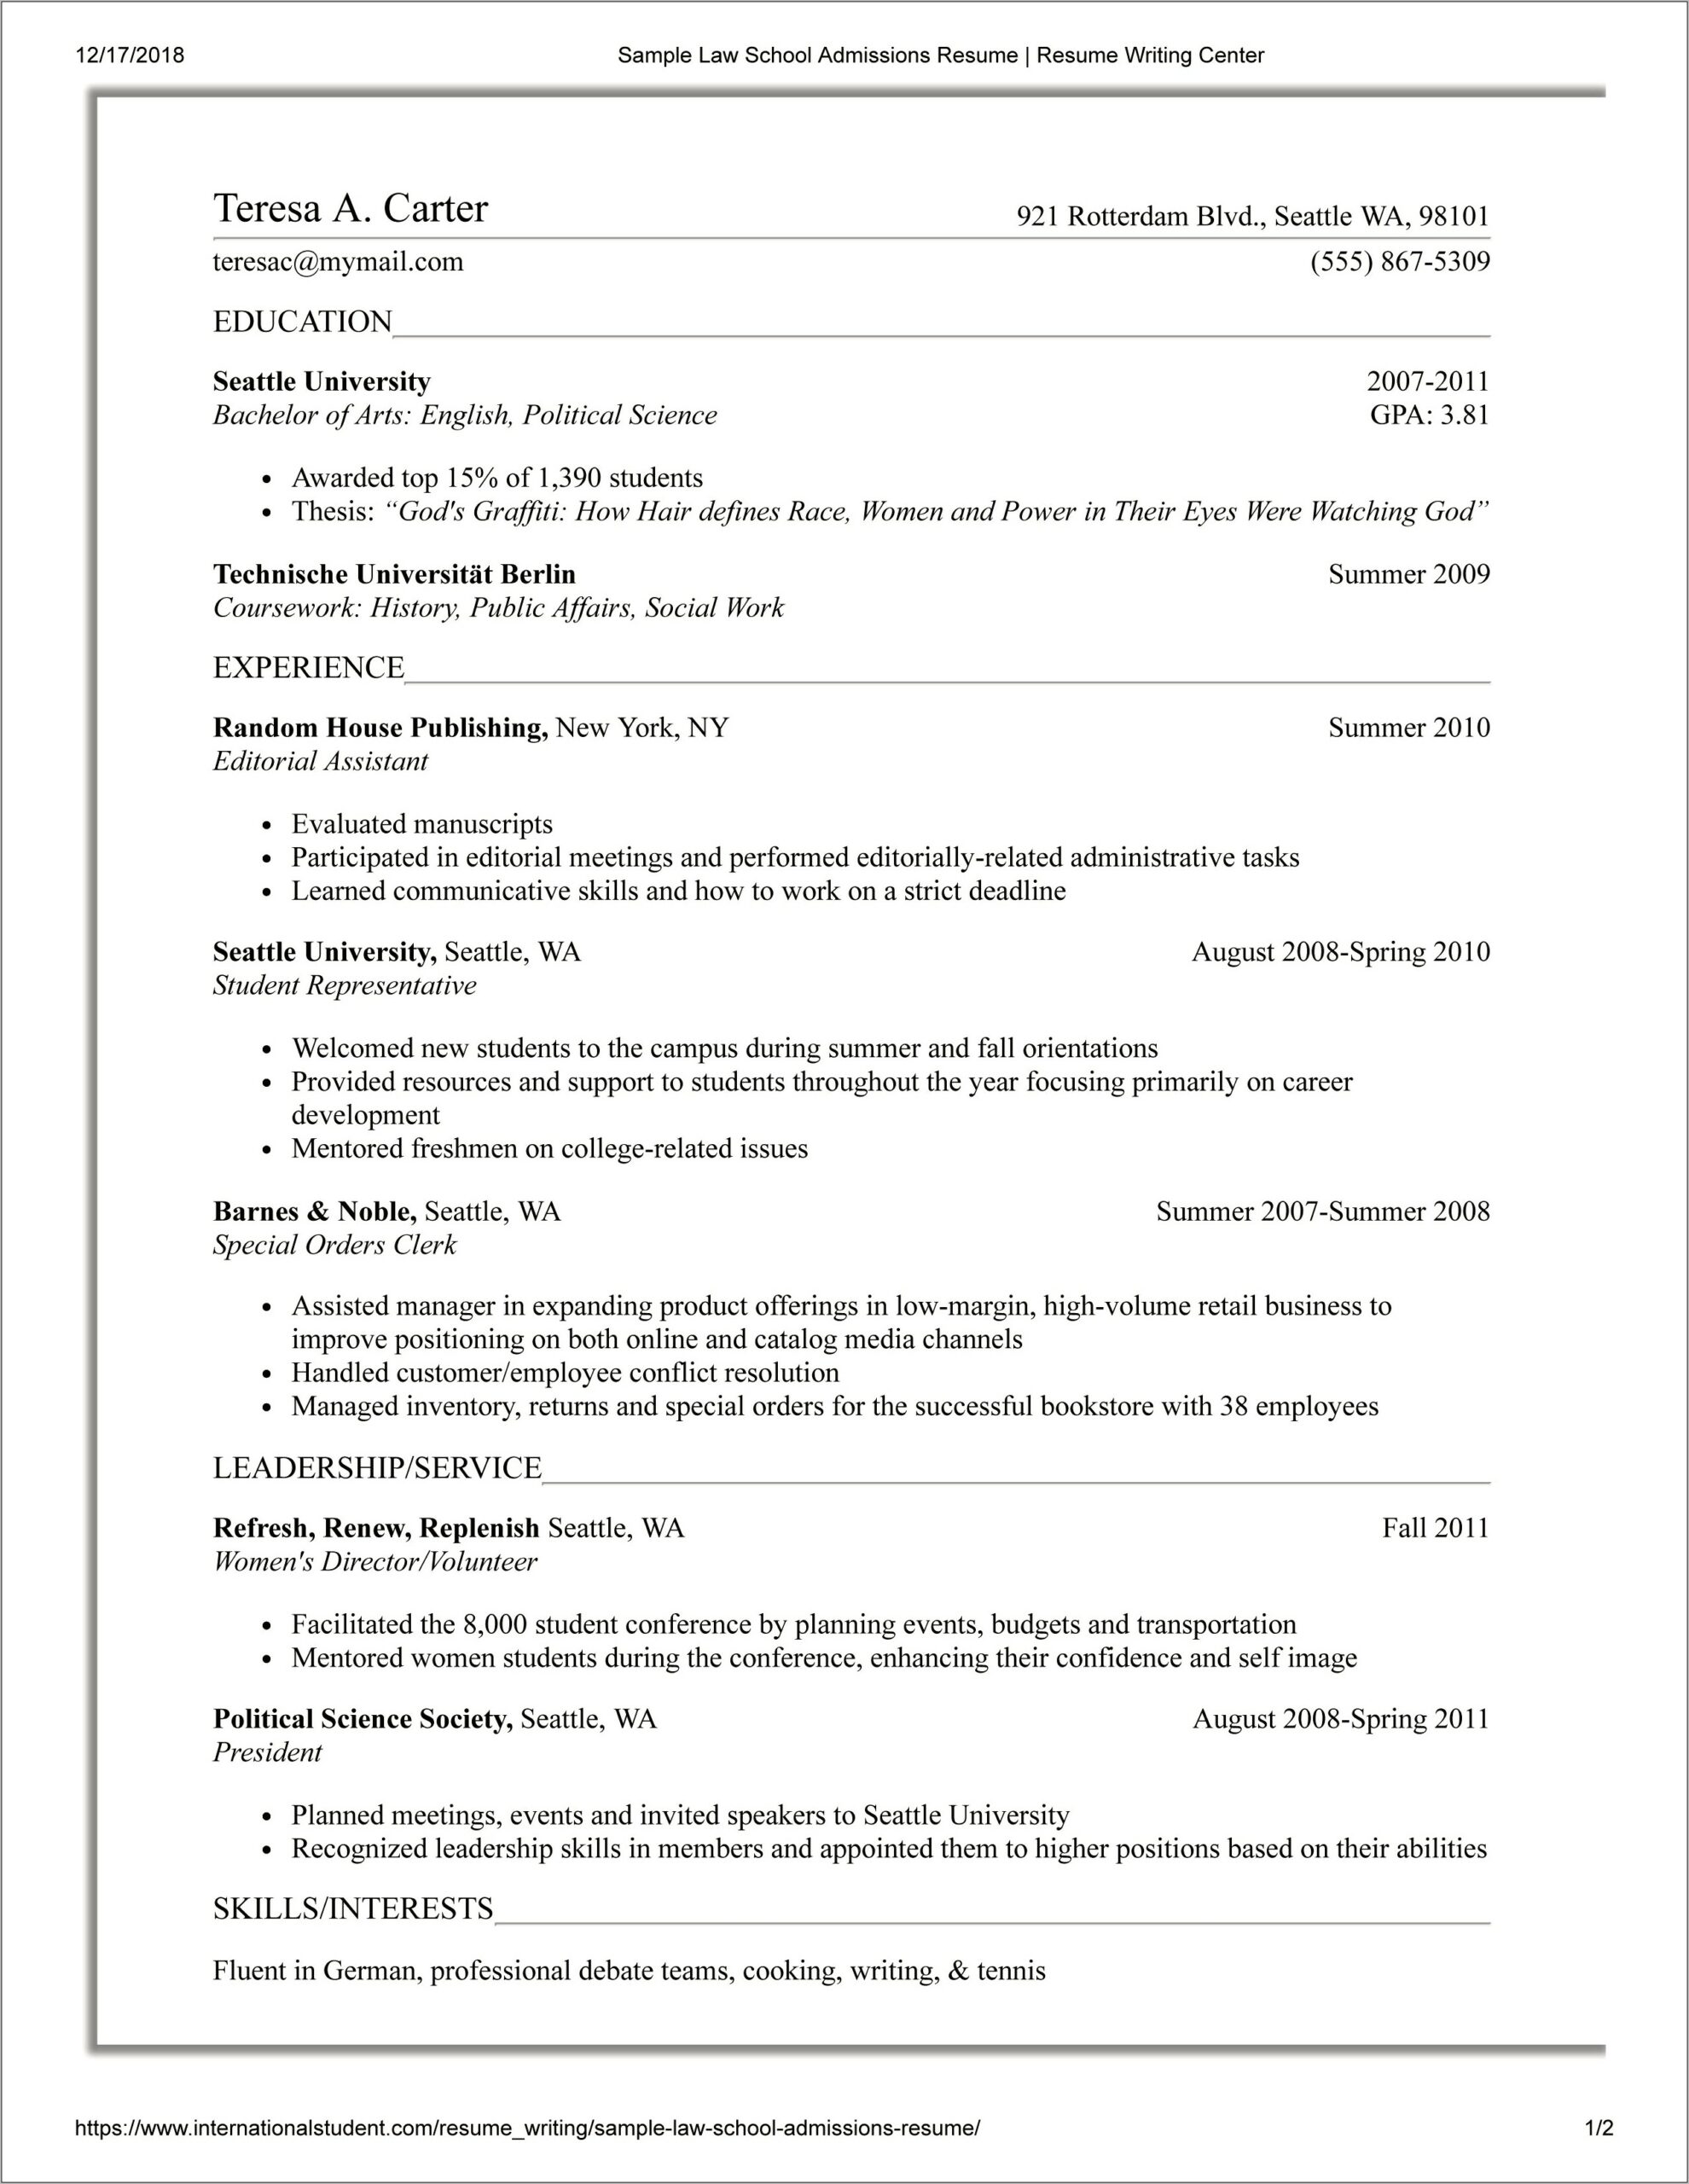 Can You Put Resume Information On School Spring